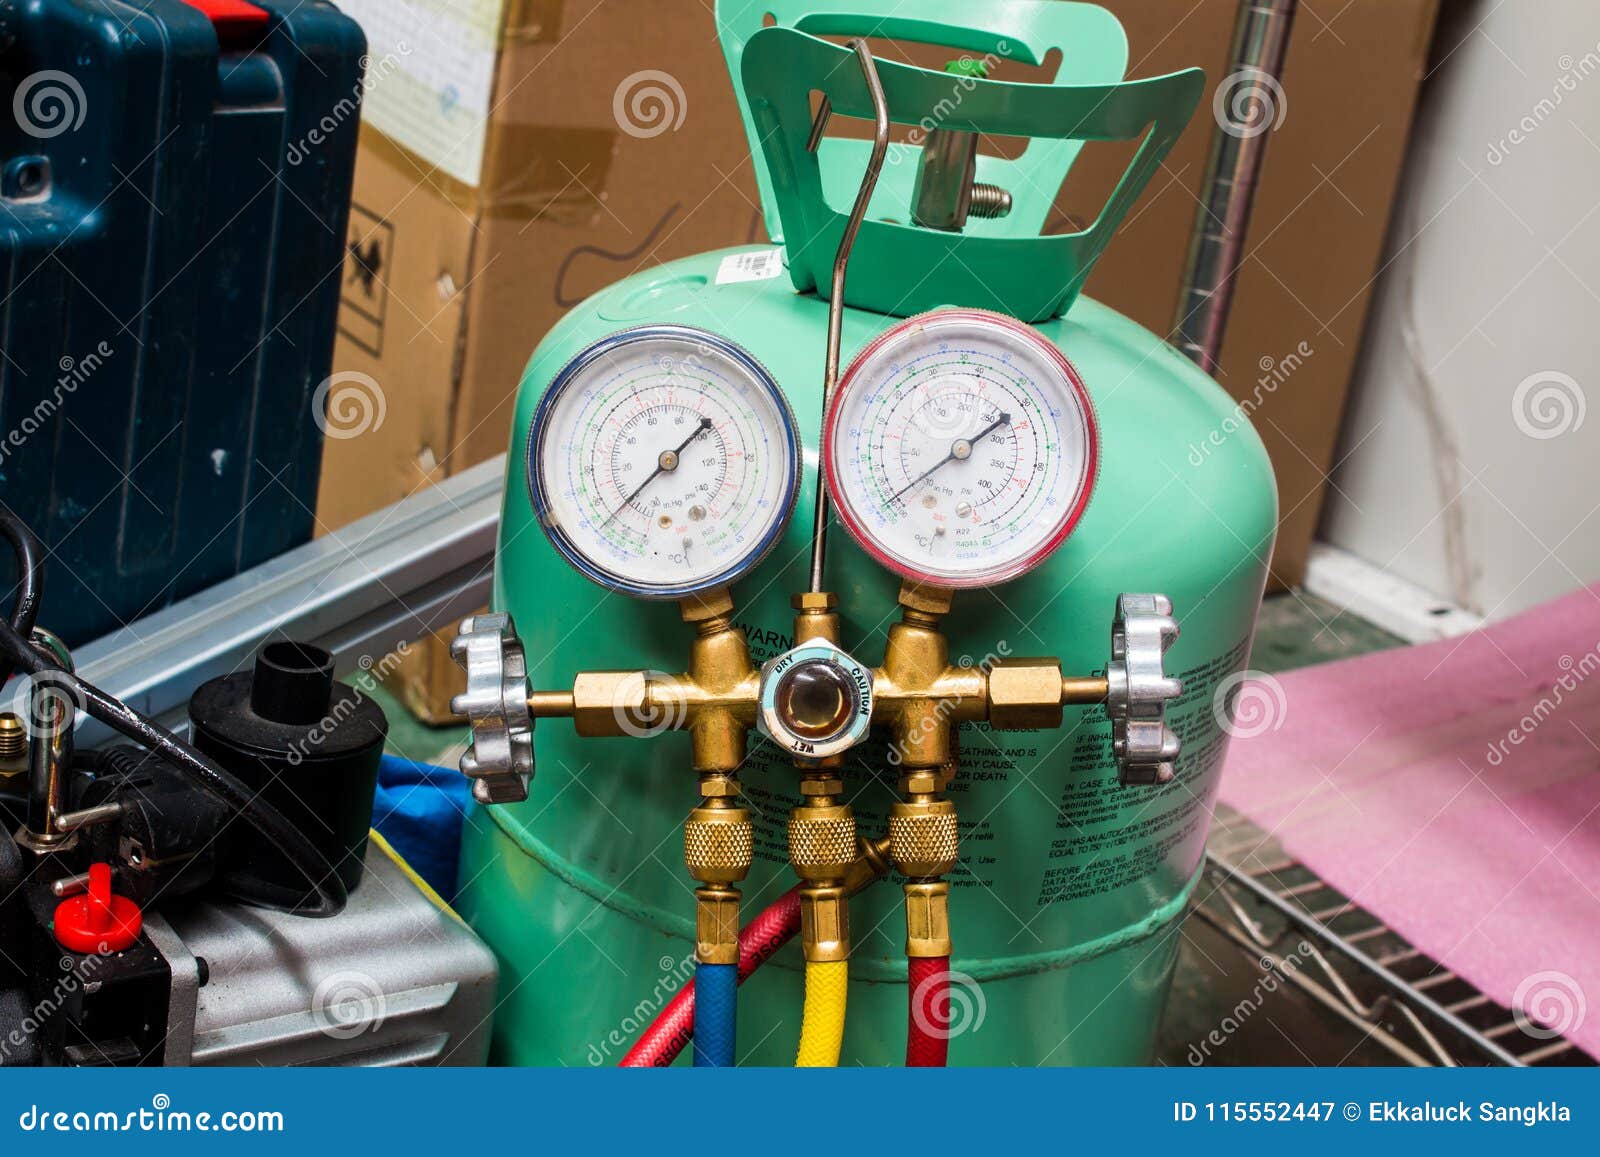 the manifold gauge for air condition service.